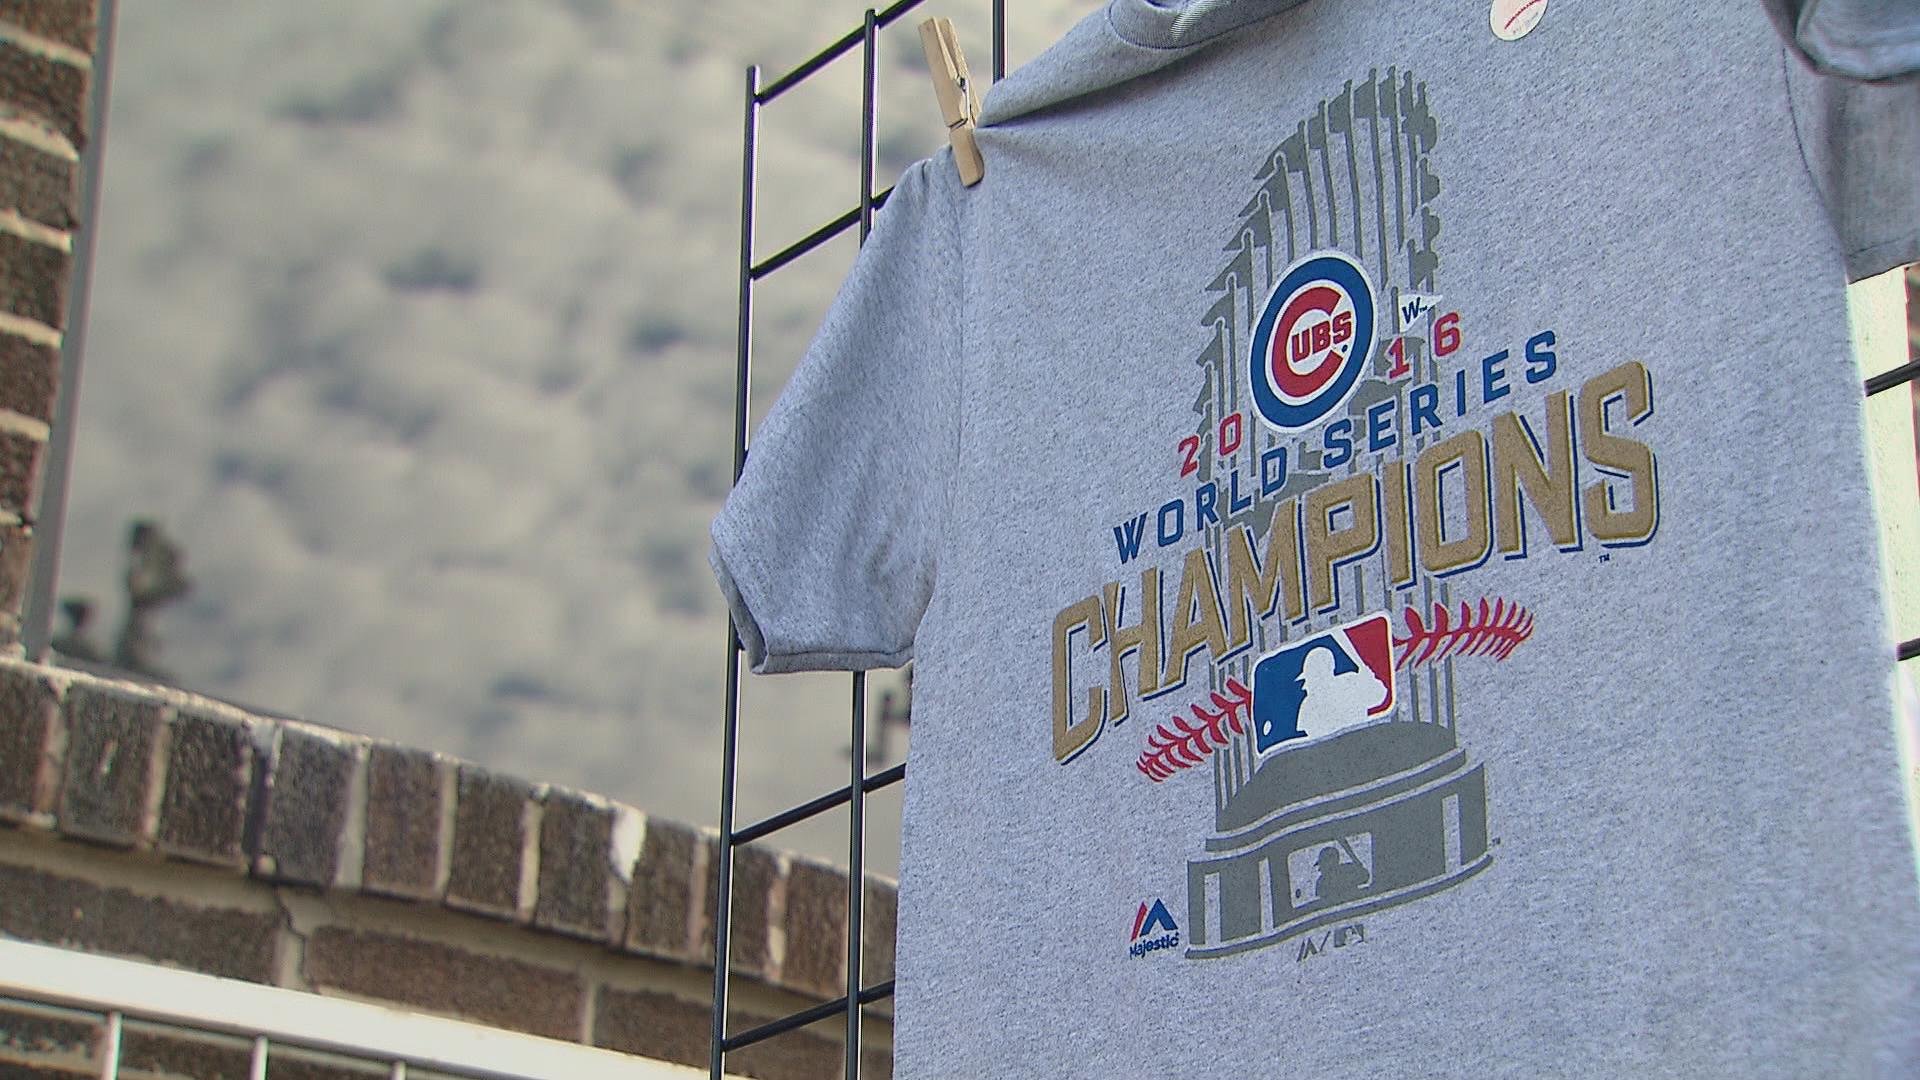 Chicago Cubs 2016 World Series Champions Celebration T-Shirt by NIKE®